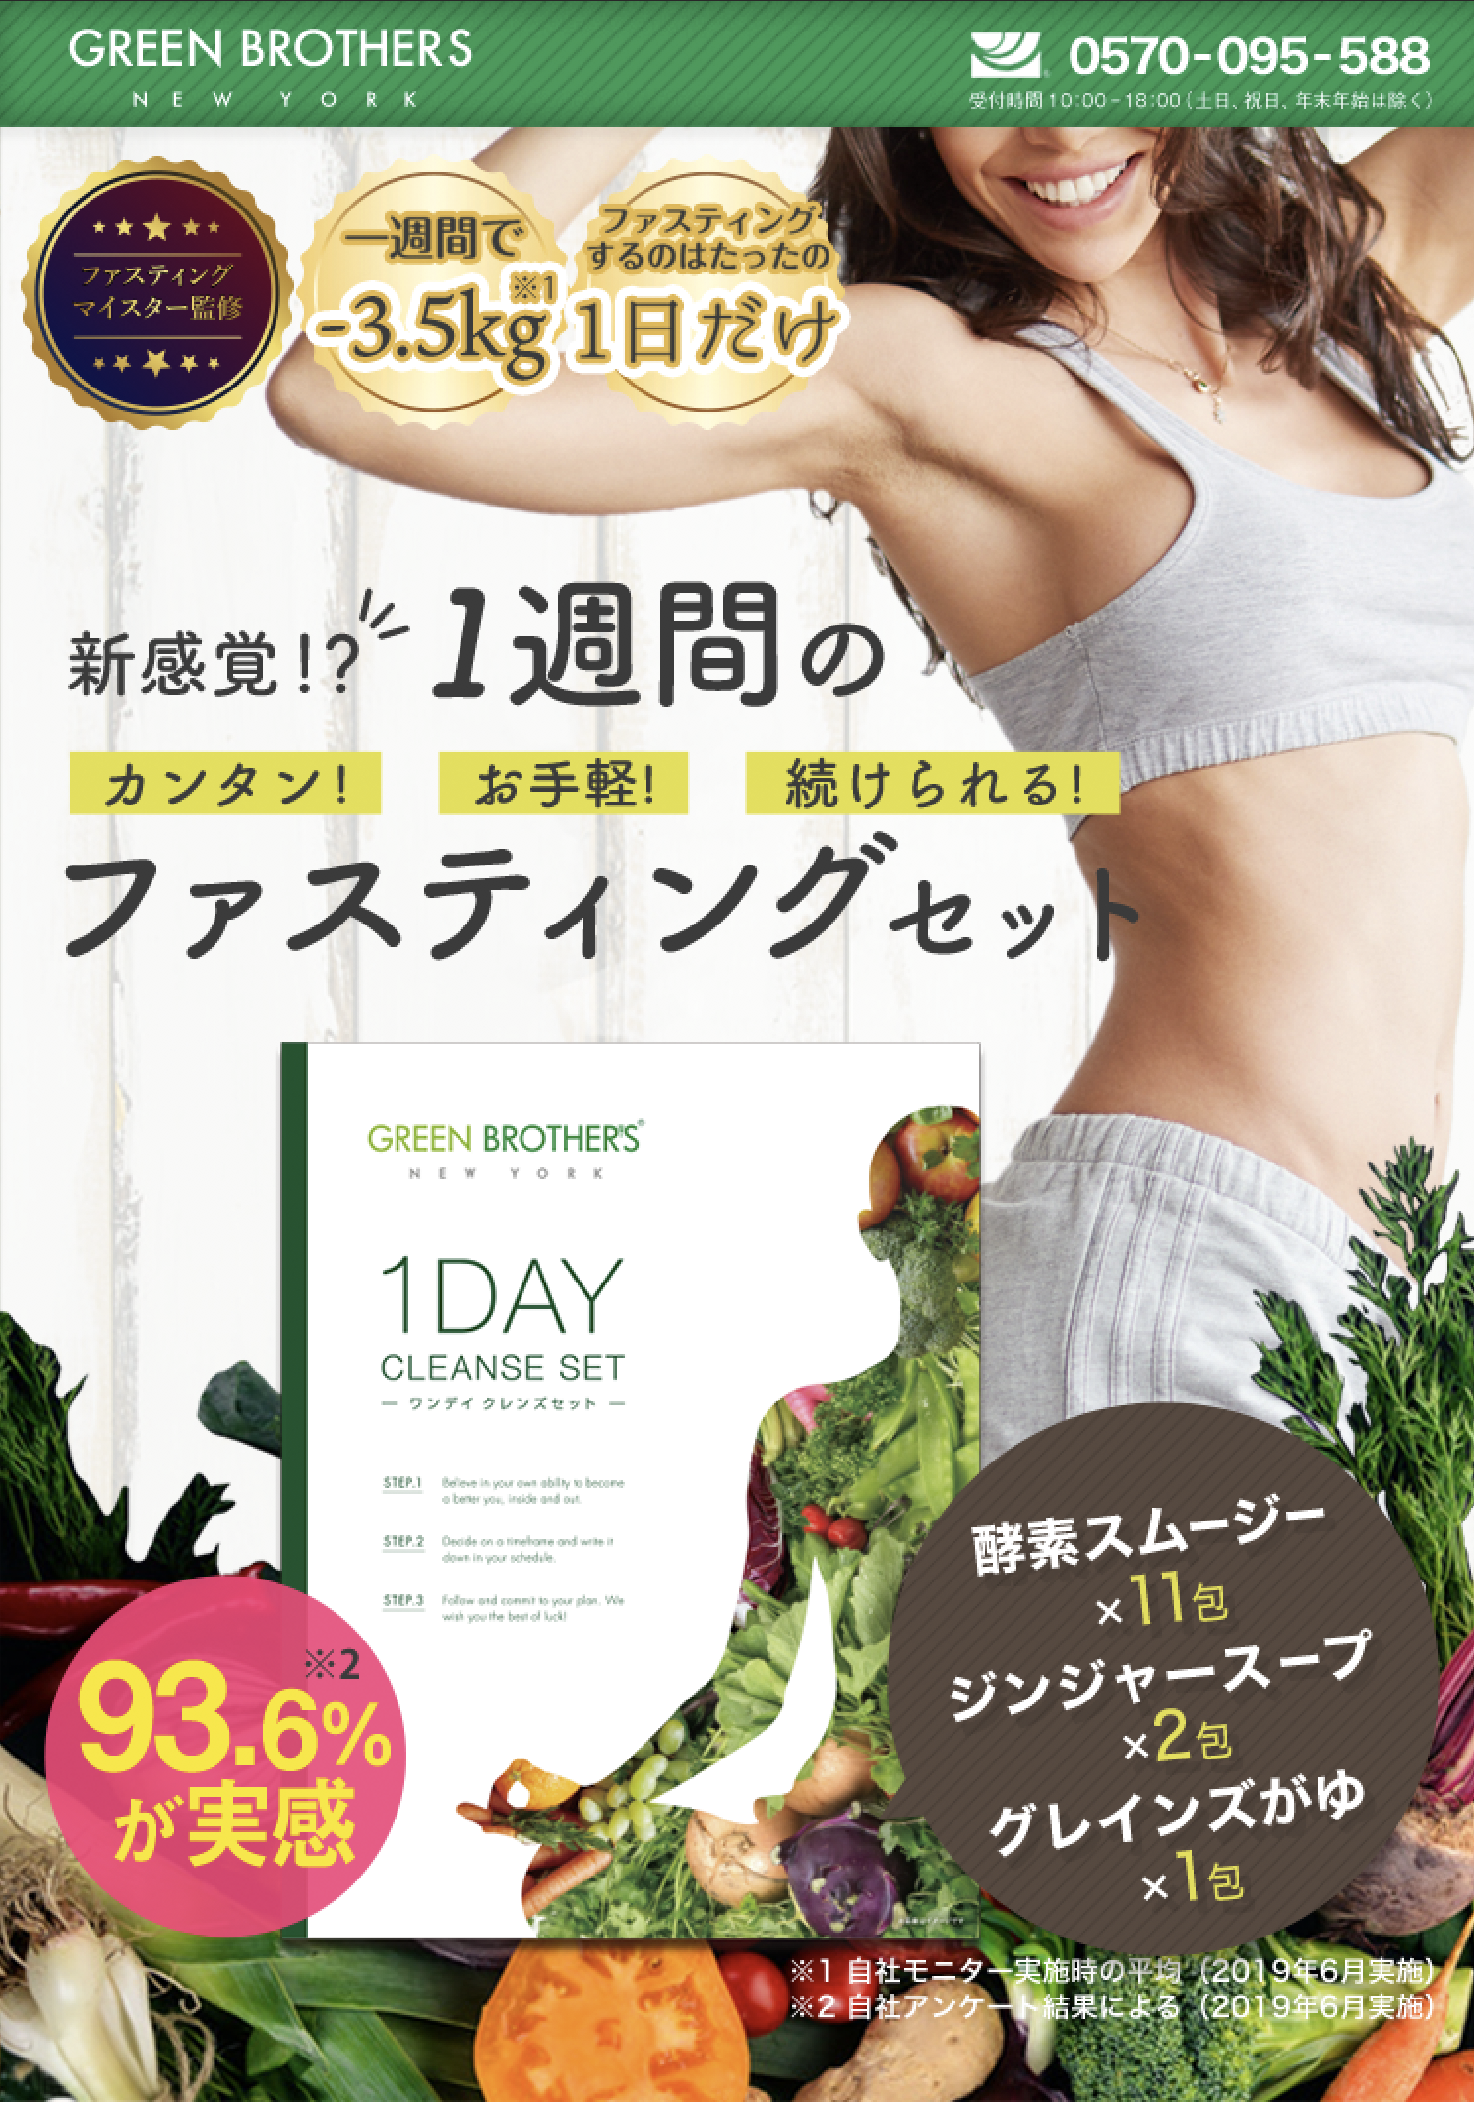 GREEN BROTHERS ファスティングセット - ダイエット食品